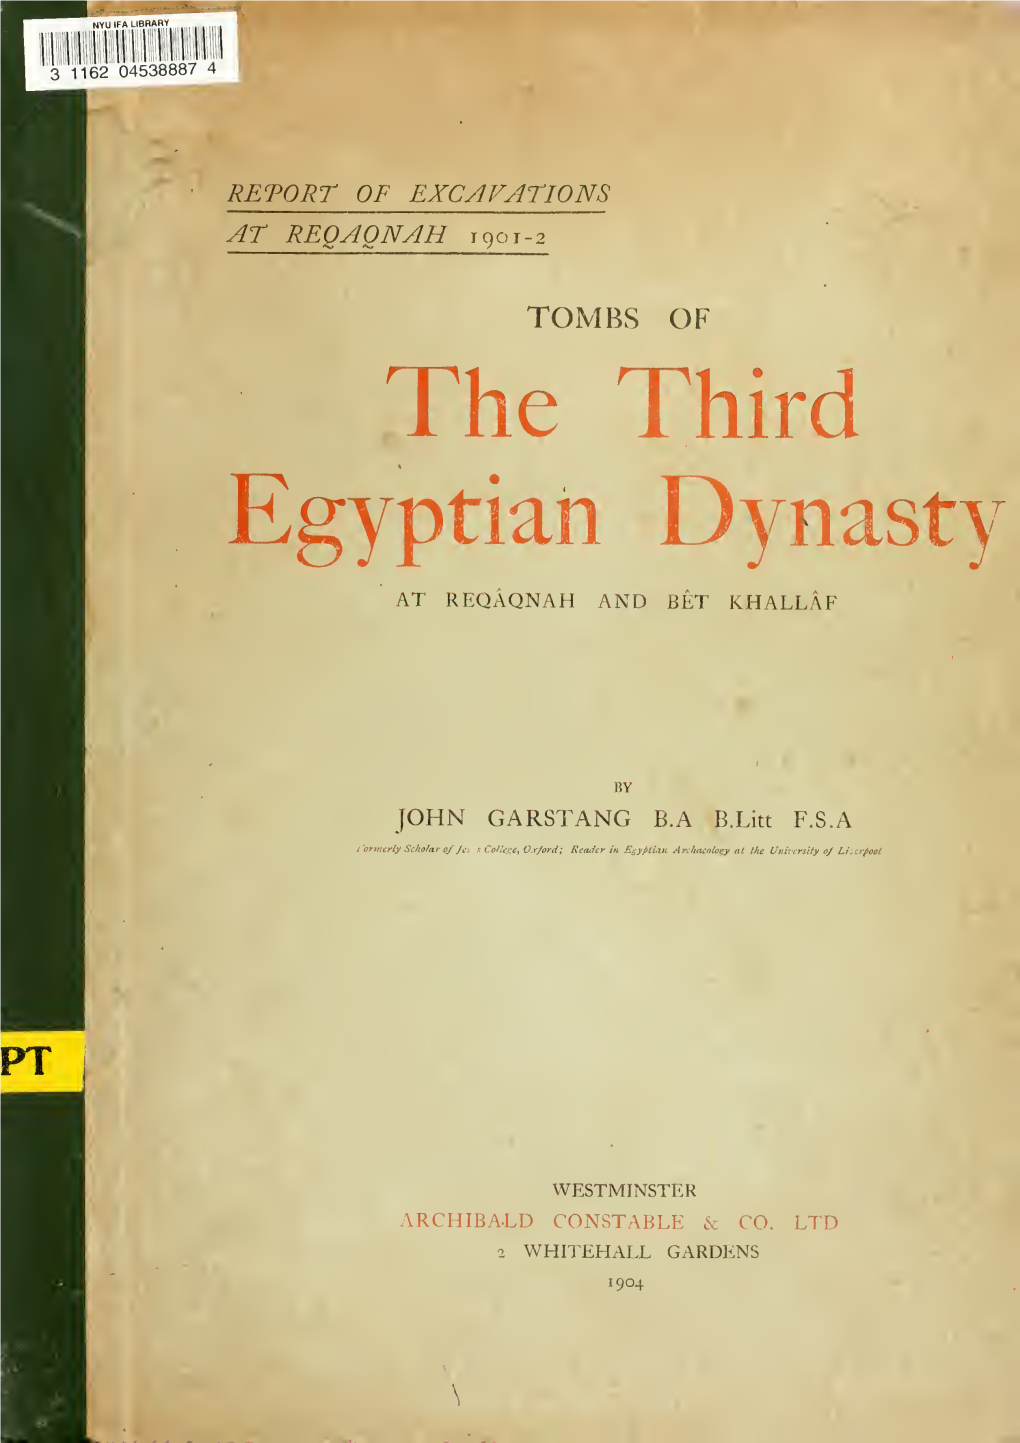 TOMBS of the Third Egyptian Dynasty